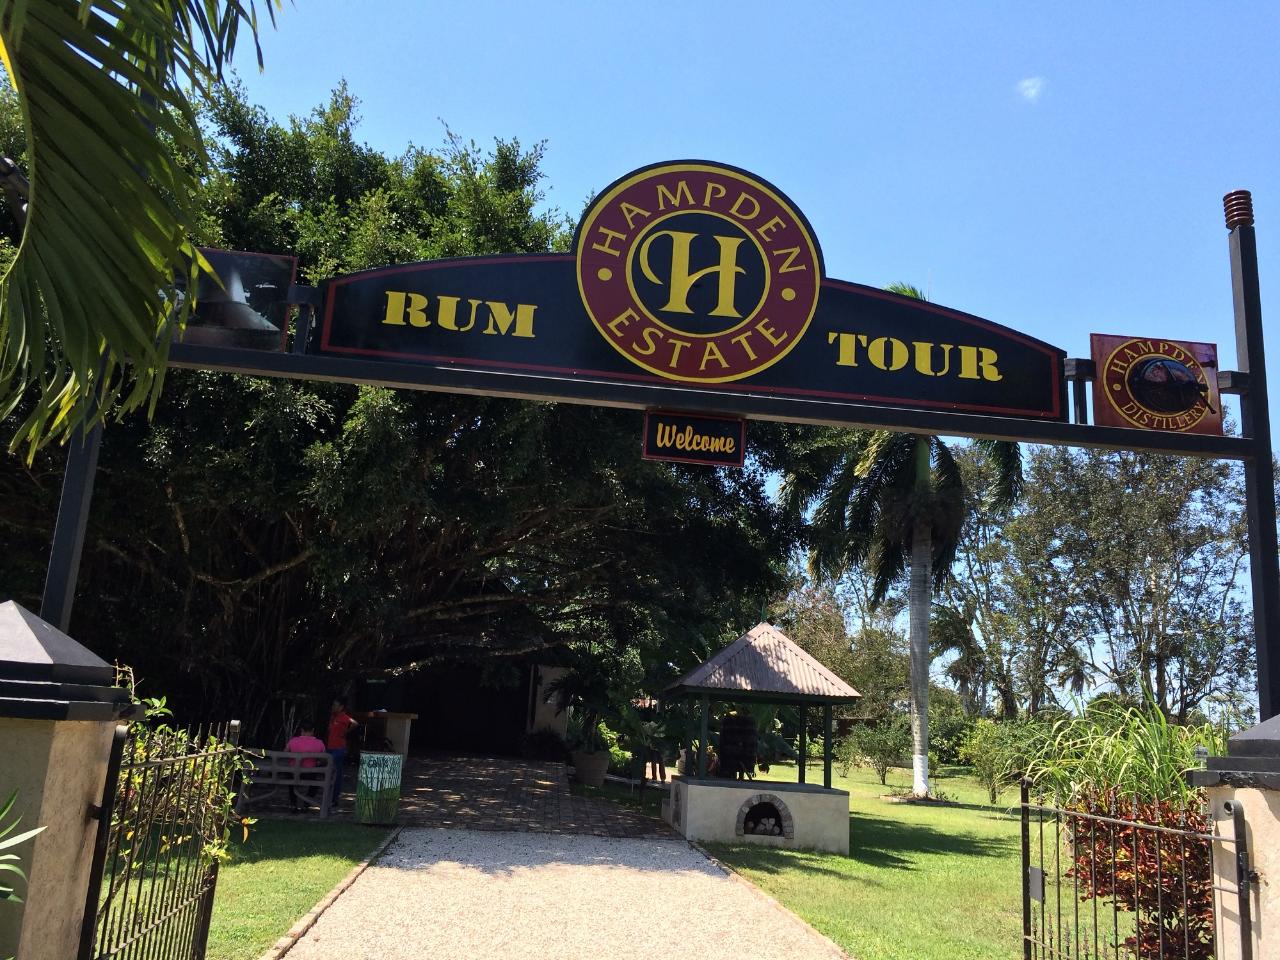 Hampden Estate Rum Tour and Lunch from Falmouth